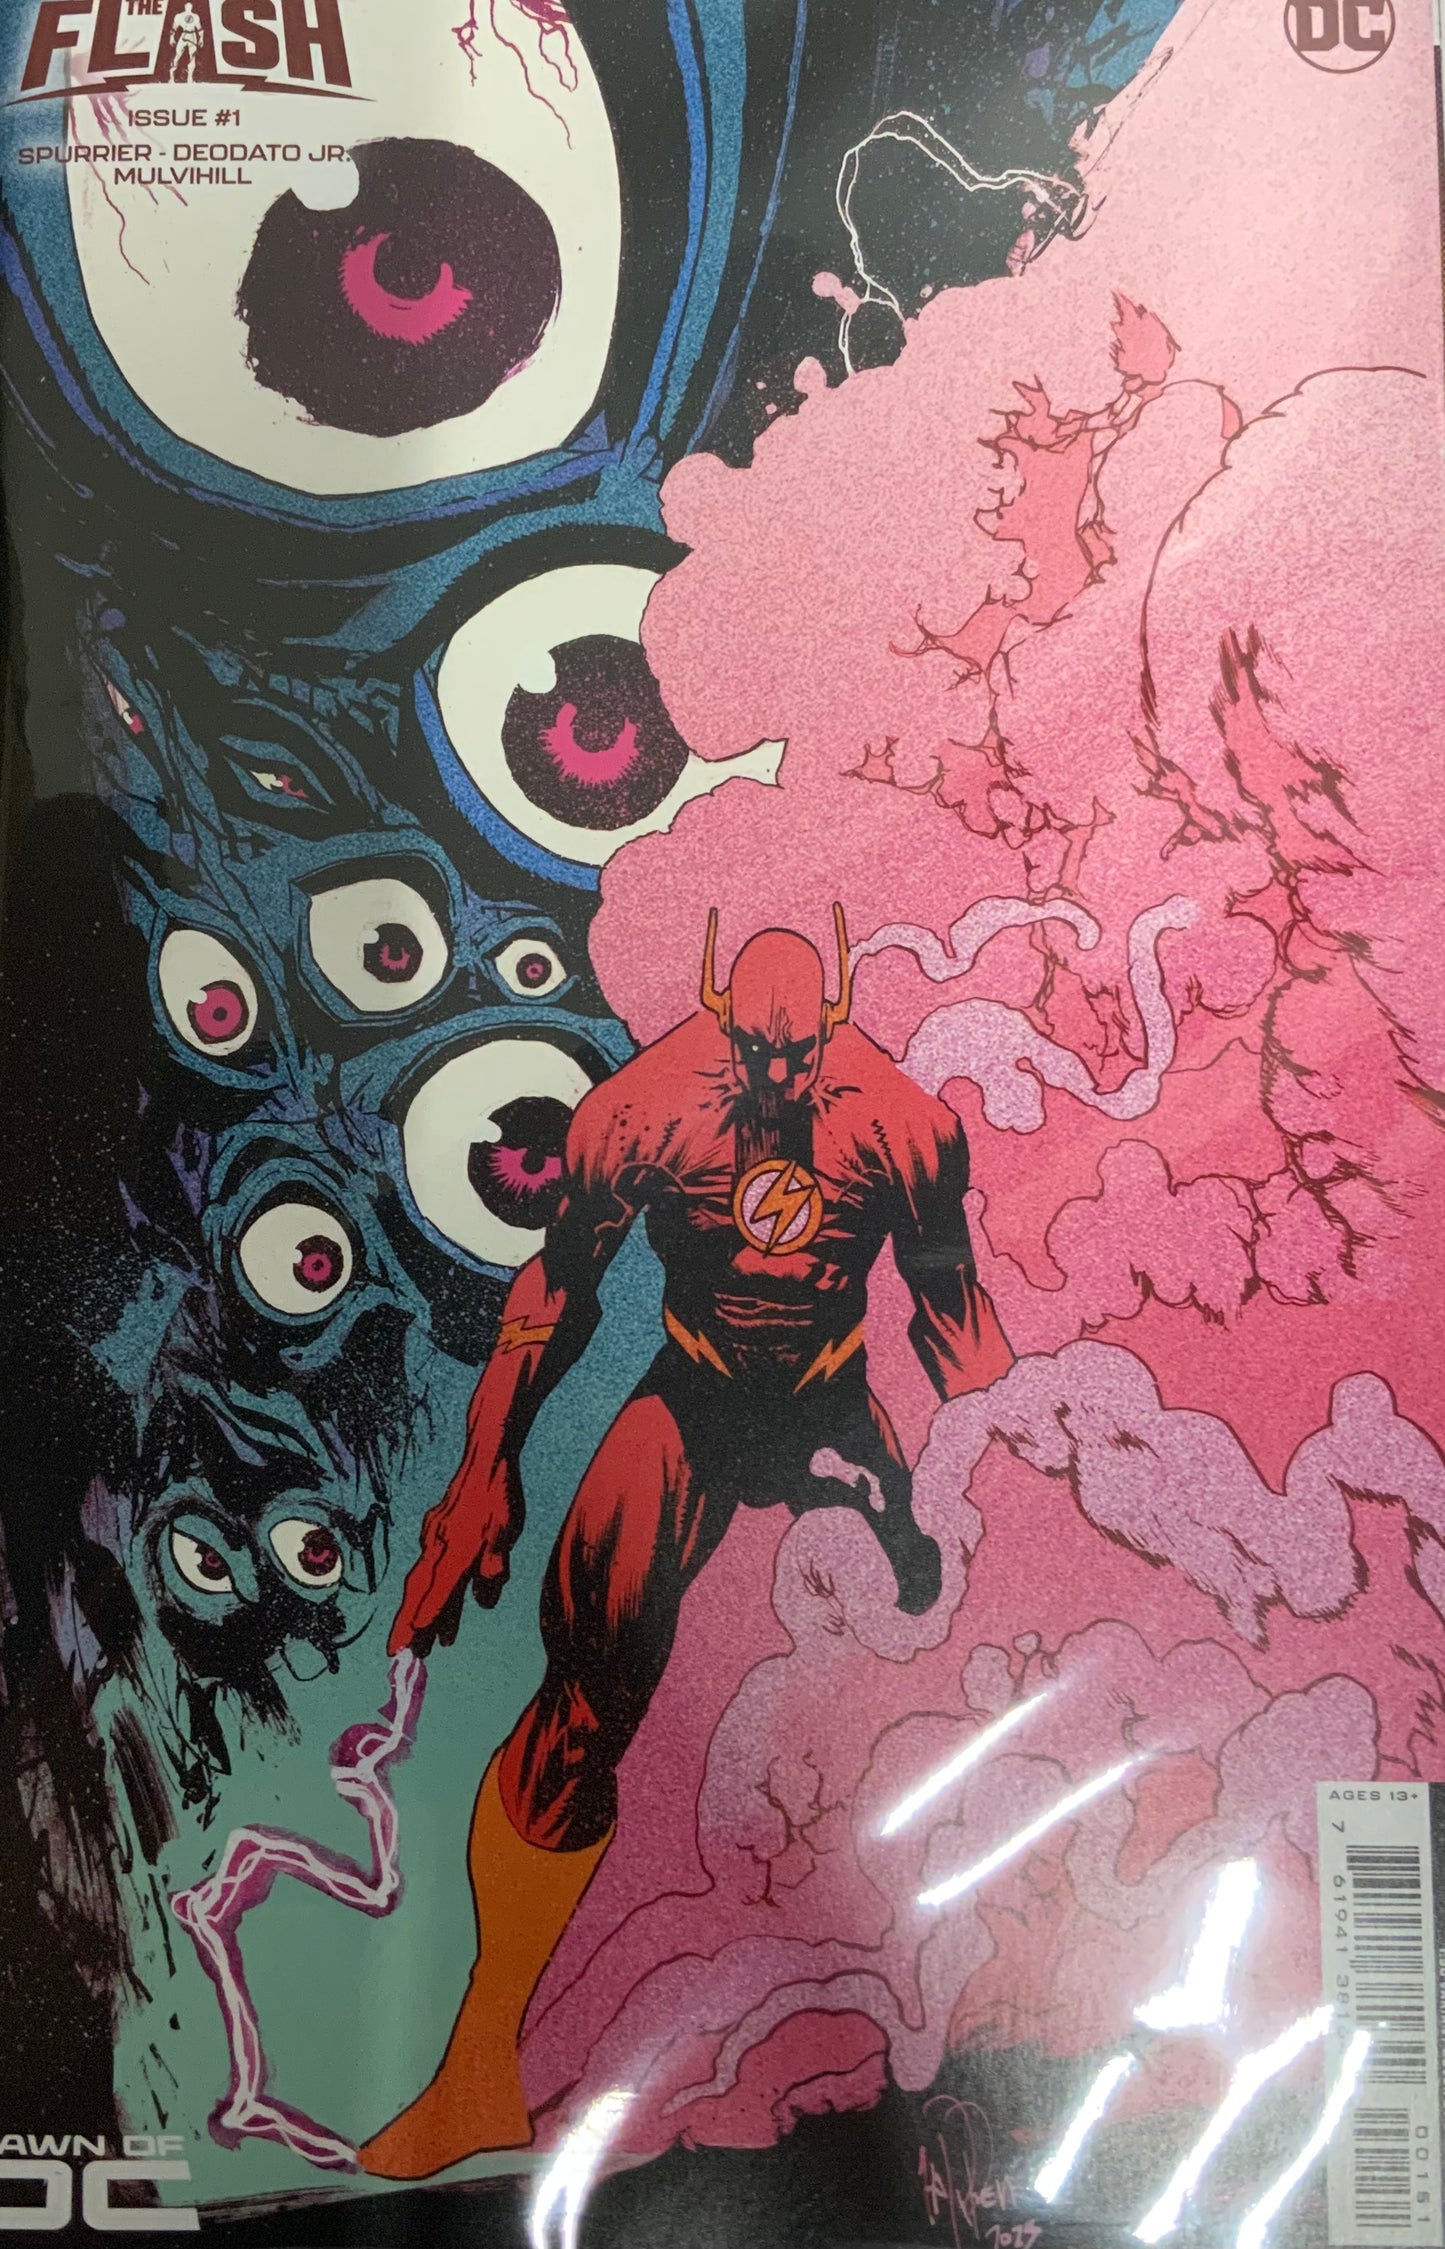 The Flash issue 1 (variant 1:50)